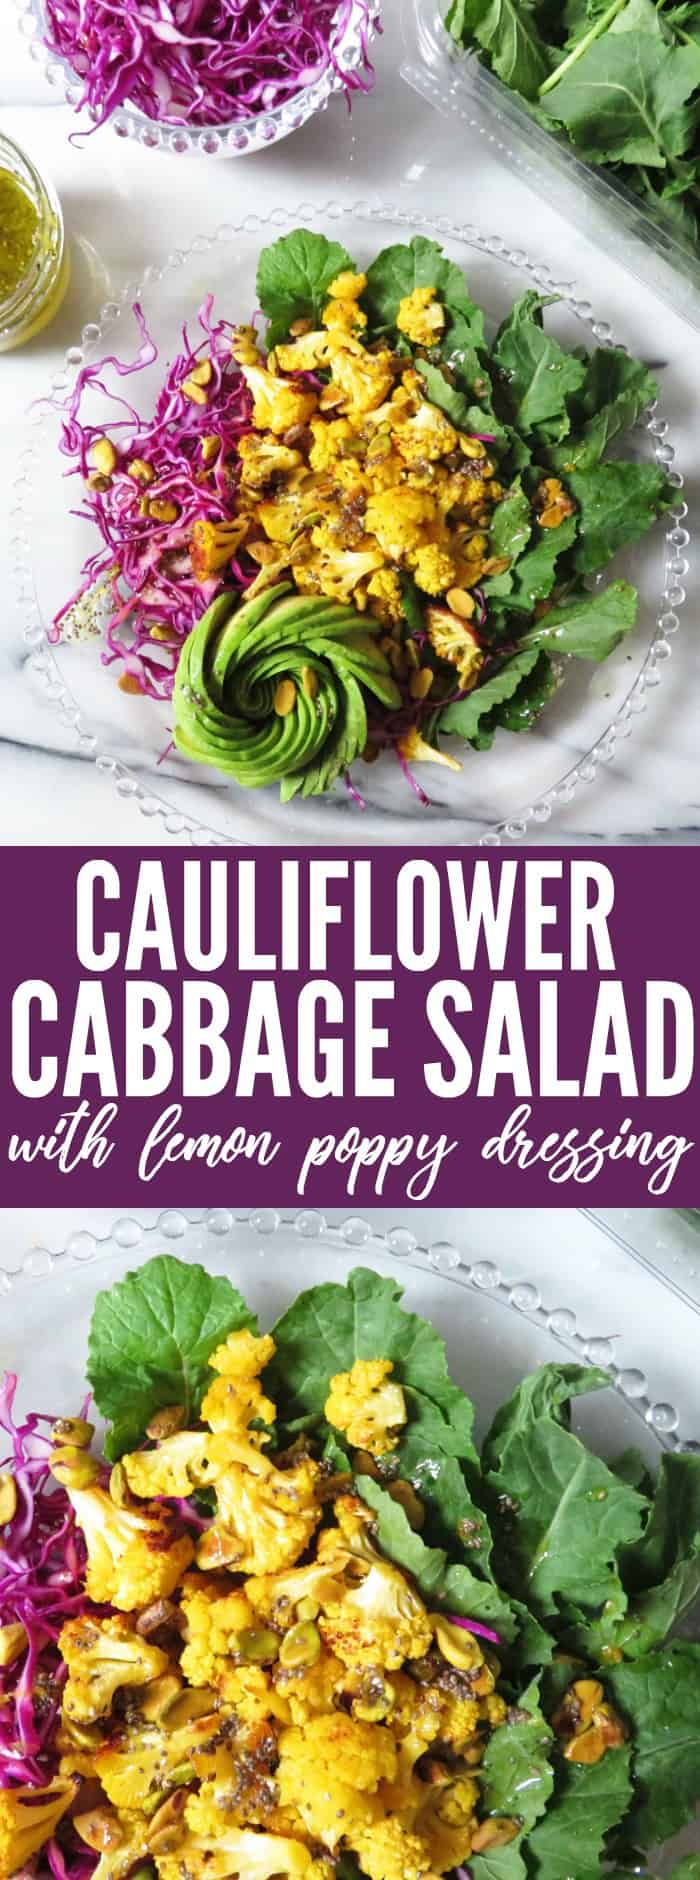 Really fun and flavorful Orange Cauliflower Salad + Lemon Poppy Dressing. It's perfect for an easy light vegetarian lunch! Low carb + gluten free! thetoastedpinenut.com #lowcarb #glutenfree #paleo